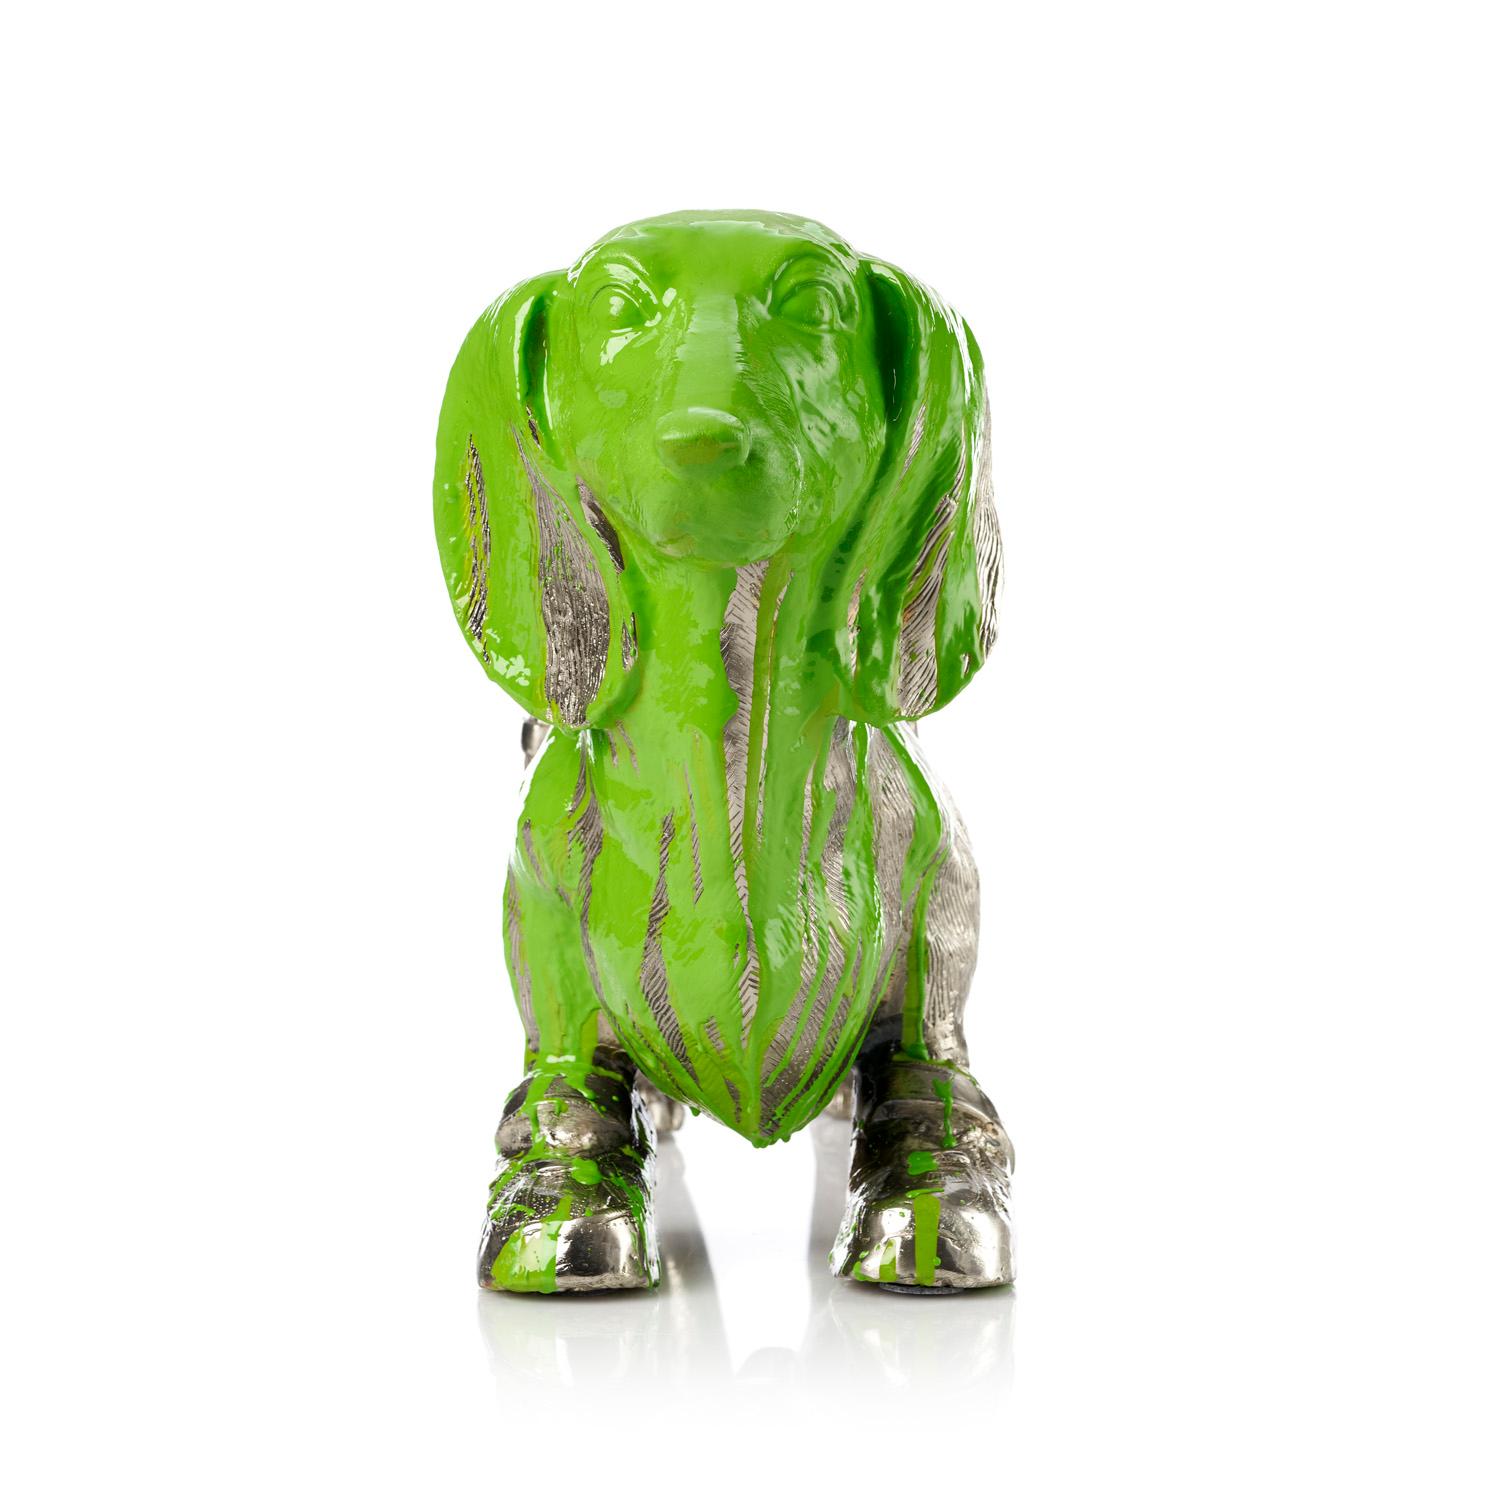 Cloned Dachshund with pet bottle (green) - Pop Art Sculpture by William Sweetlove